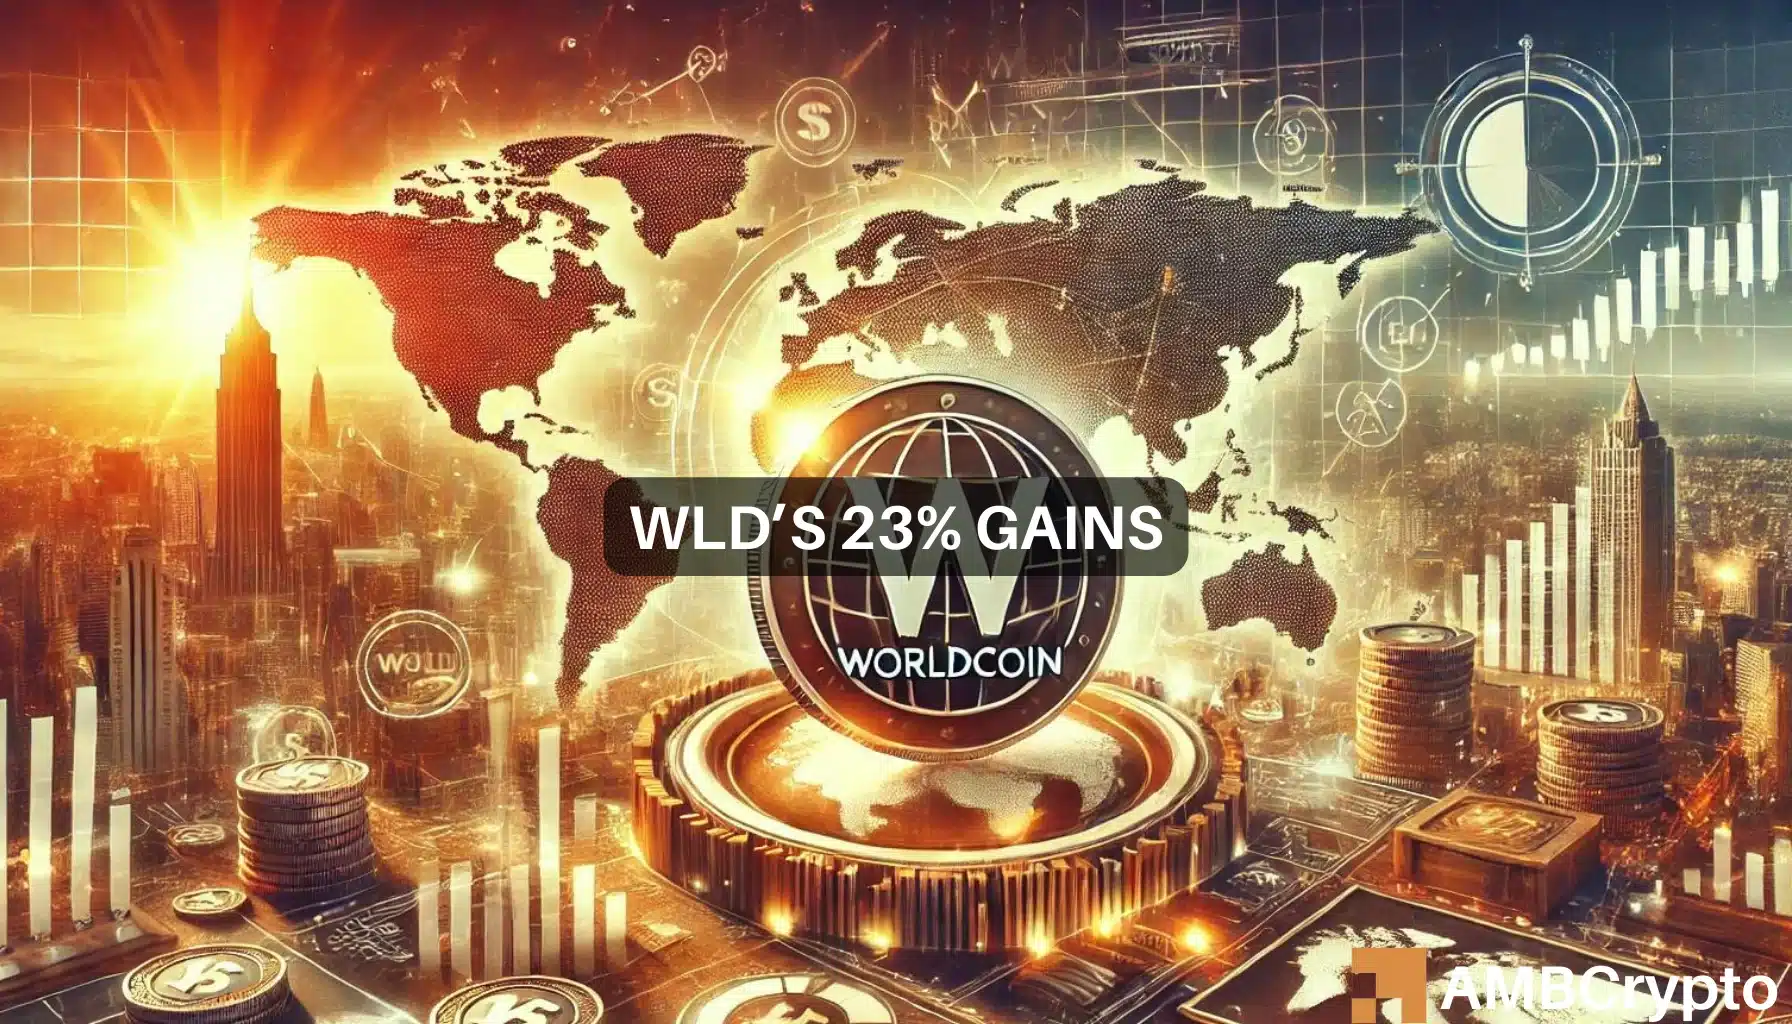 Worldcoin bulls make an appearance, push WLD up 23%: But why now?